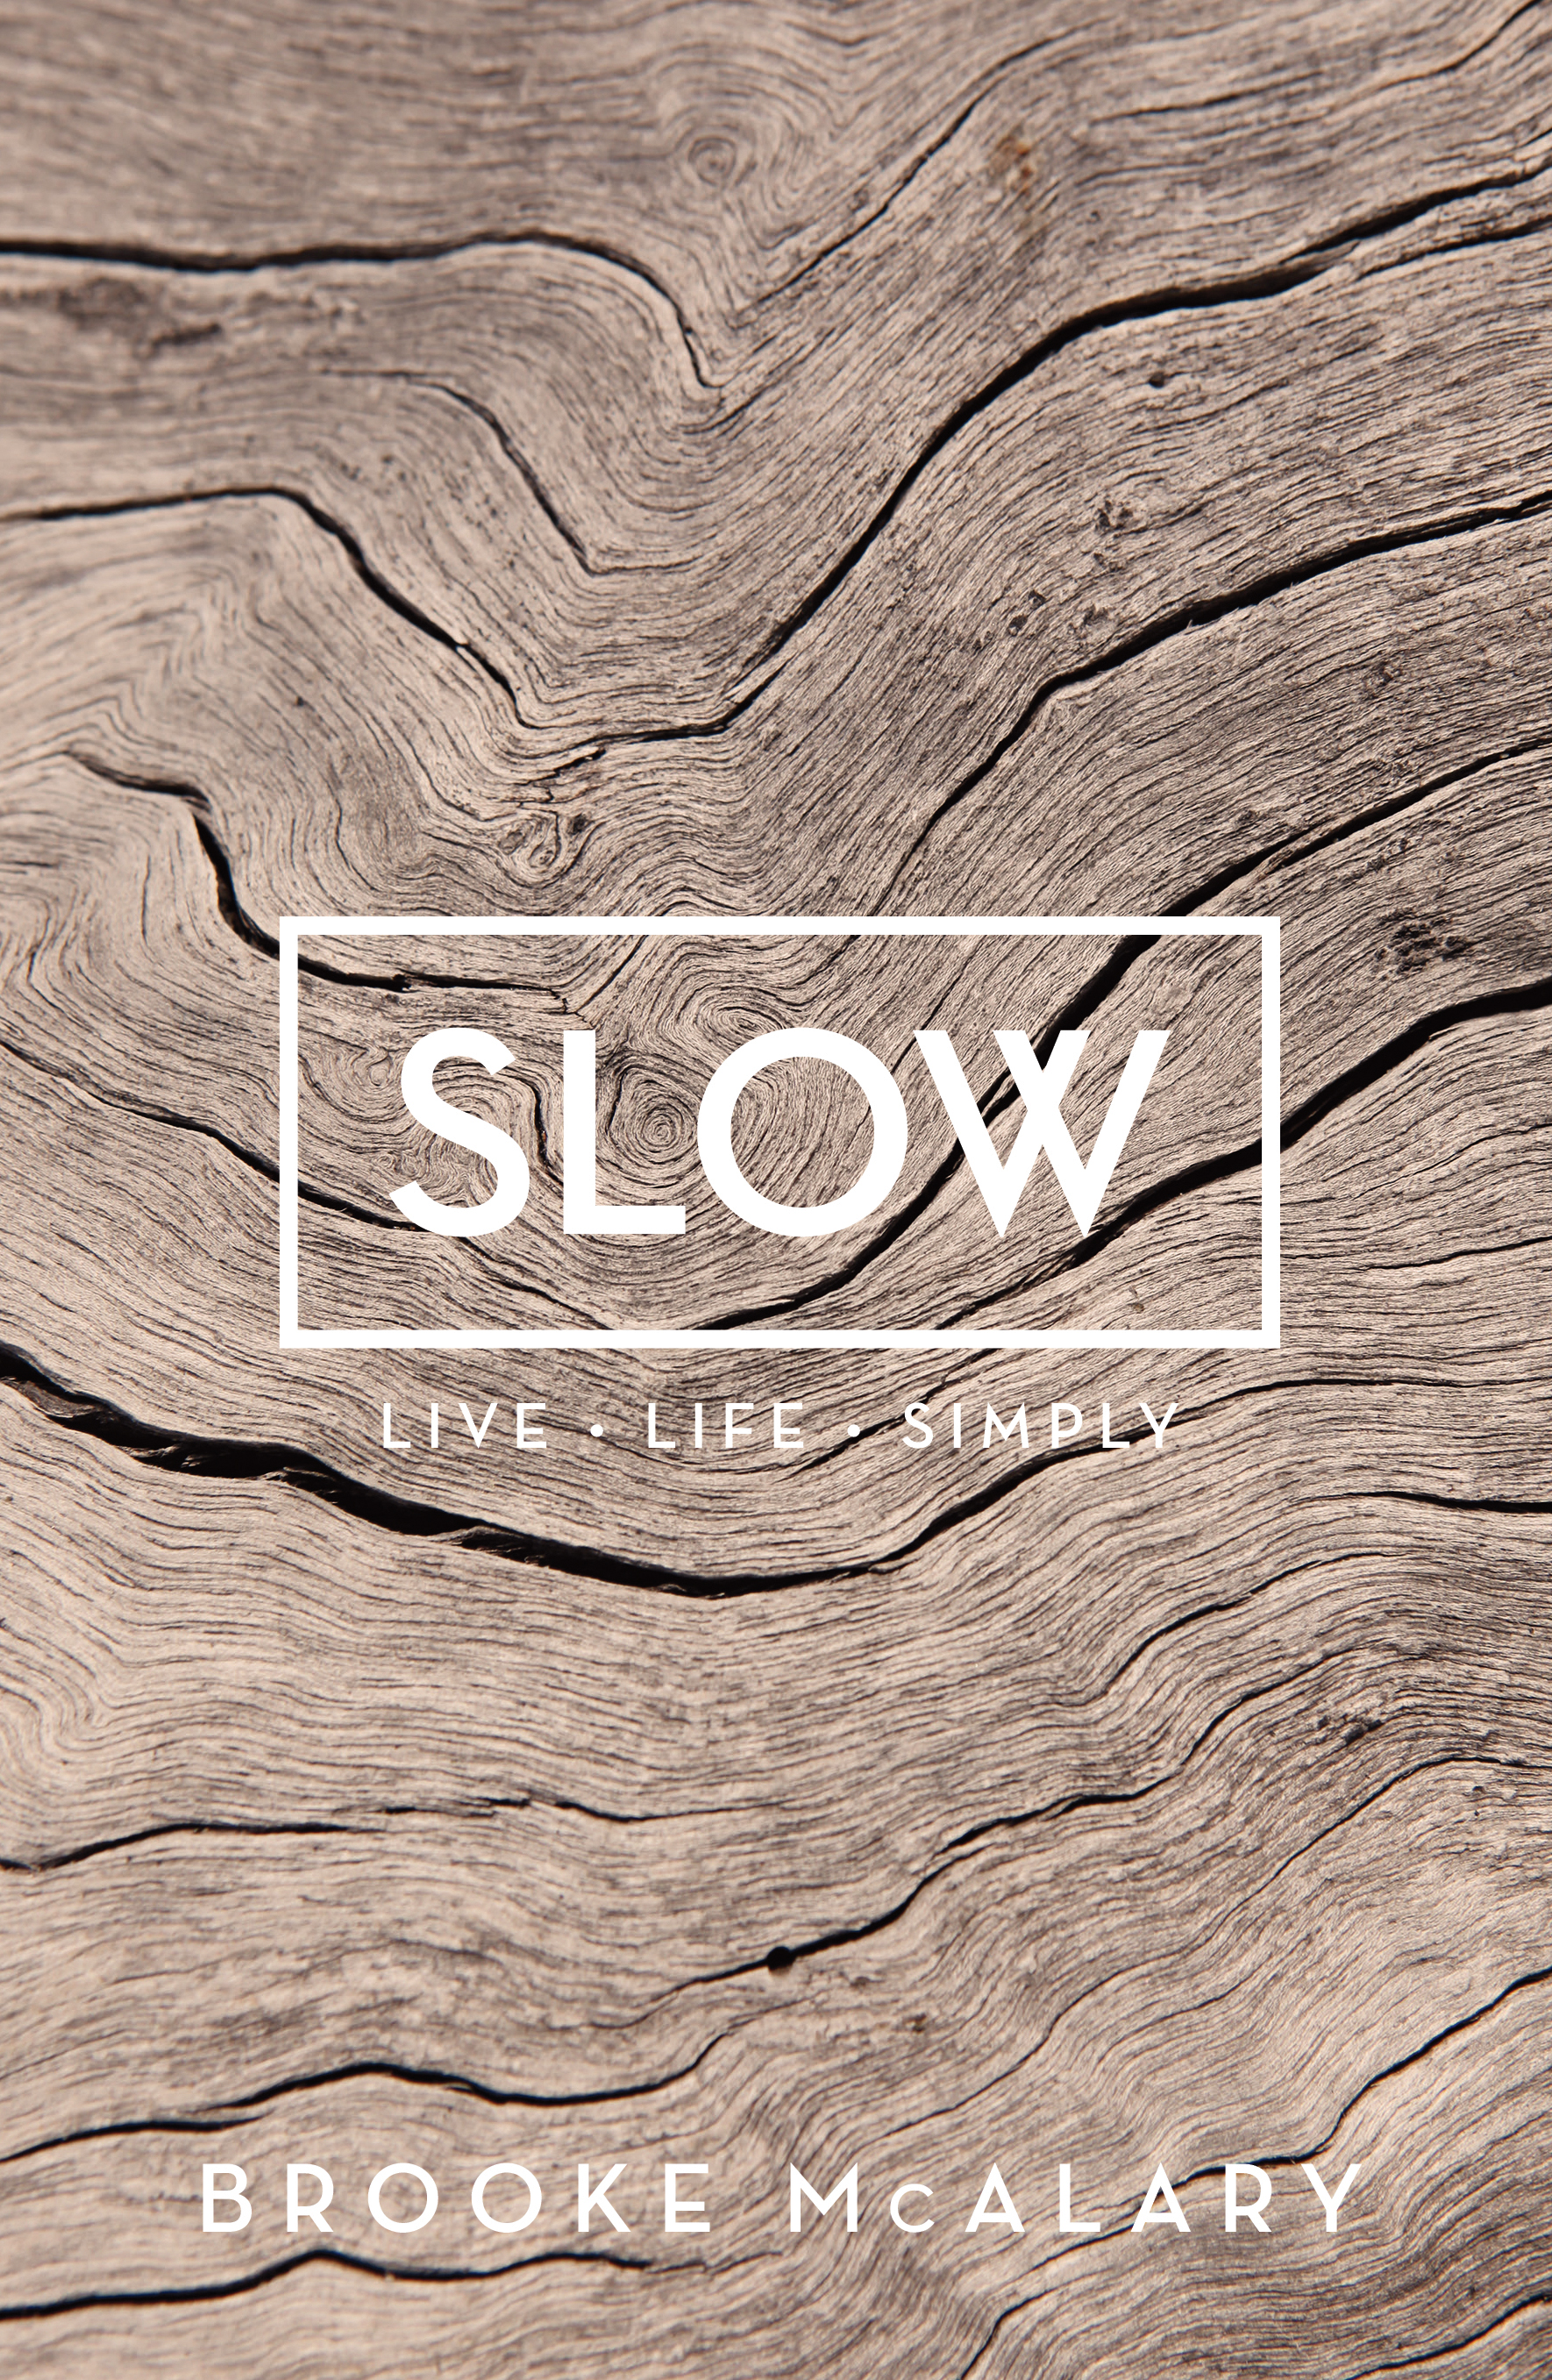 Slow. Live life simply. By Brroke McAlary